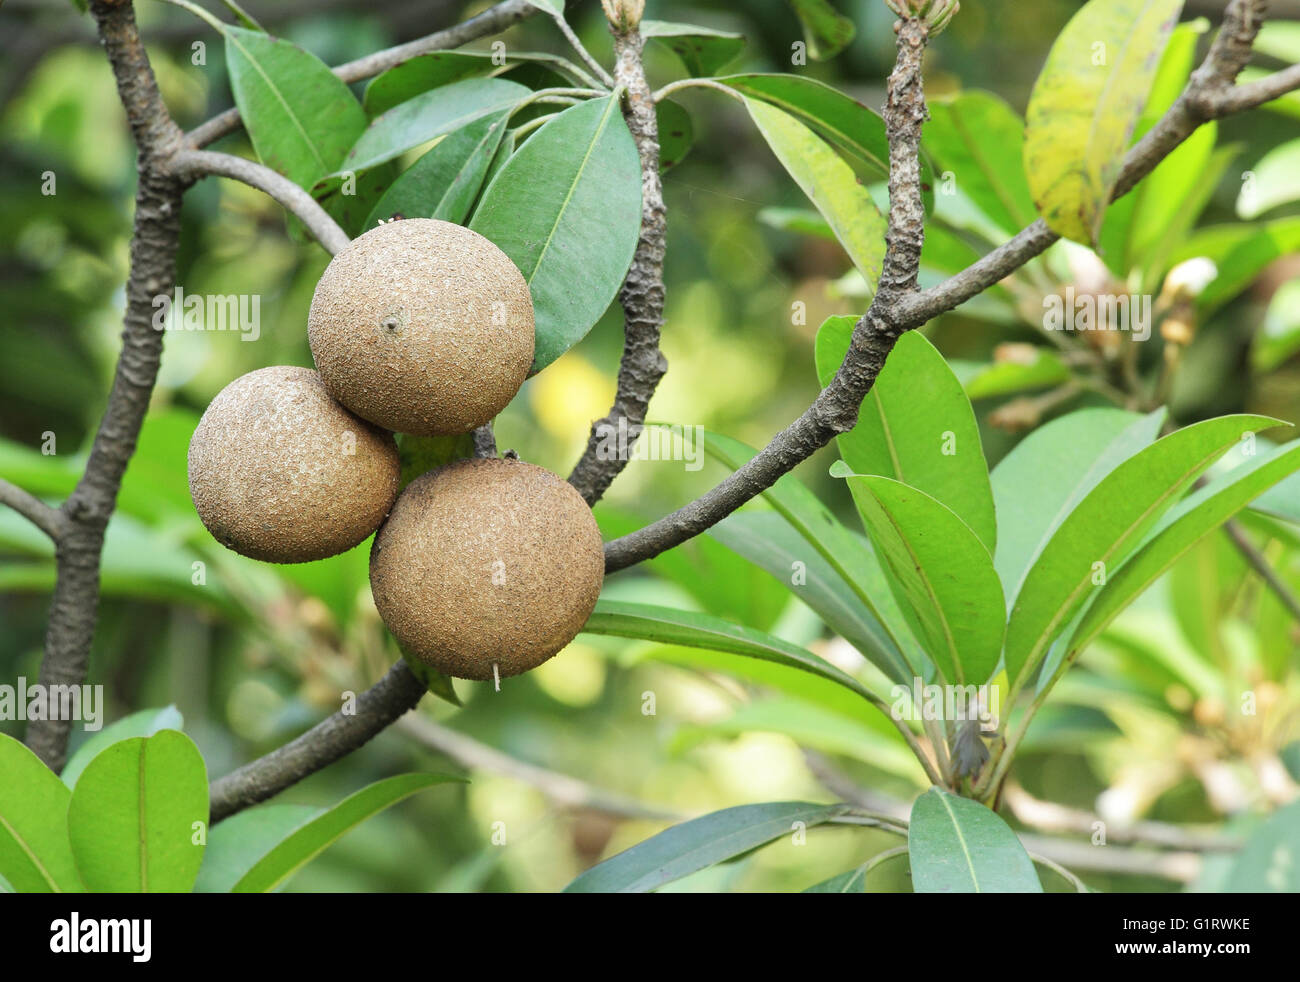 Ripening Sapodilla fruits in organic garden. A tropical, evergreen tree fruit with sweet and malty flavor. Stock Photo